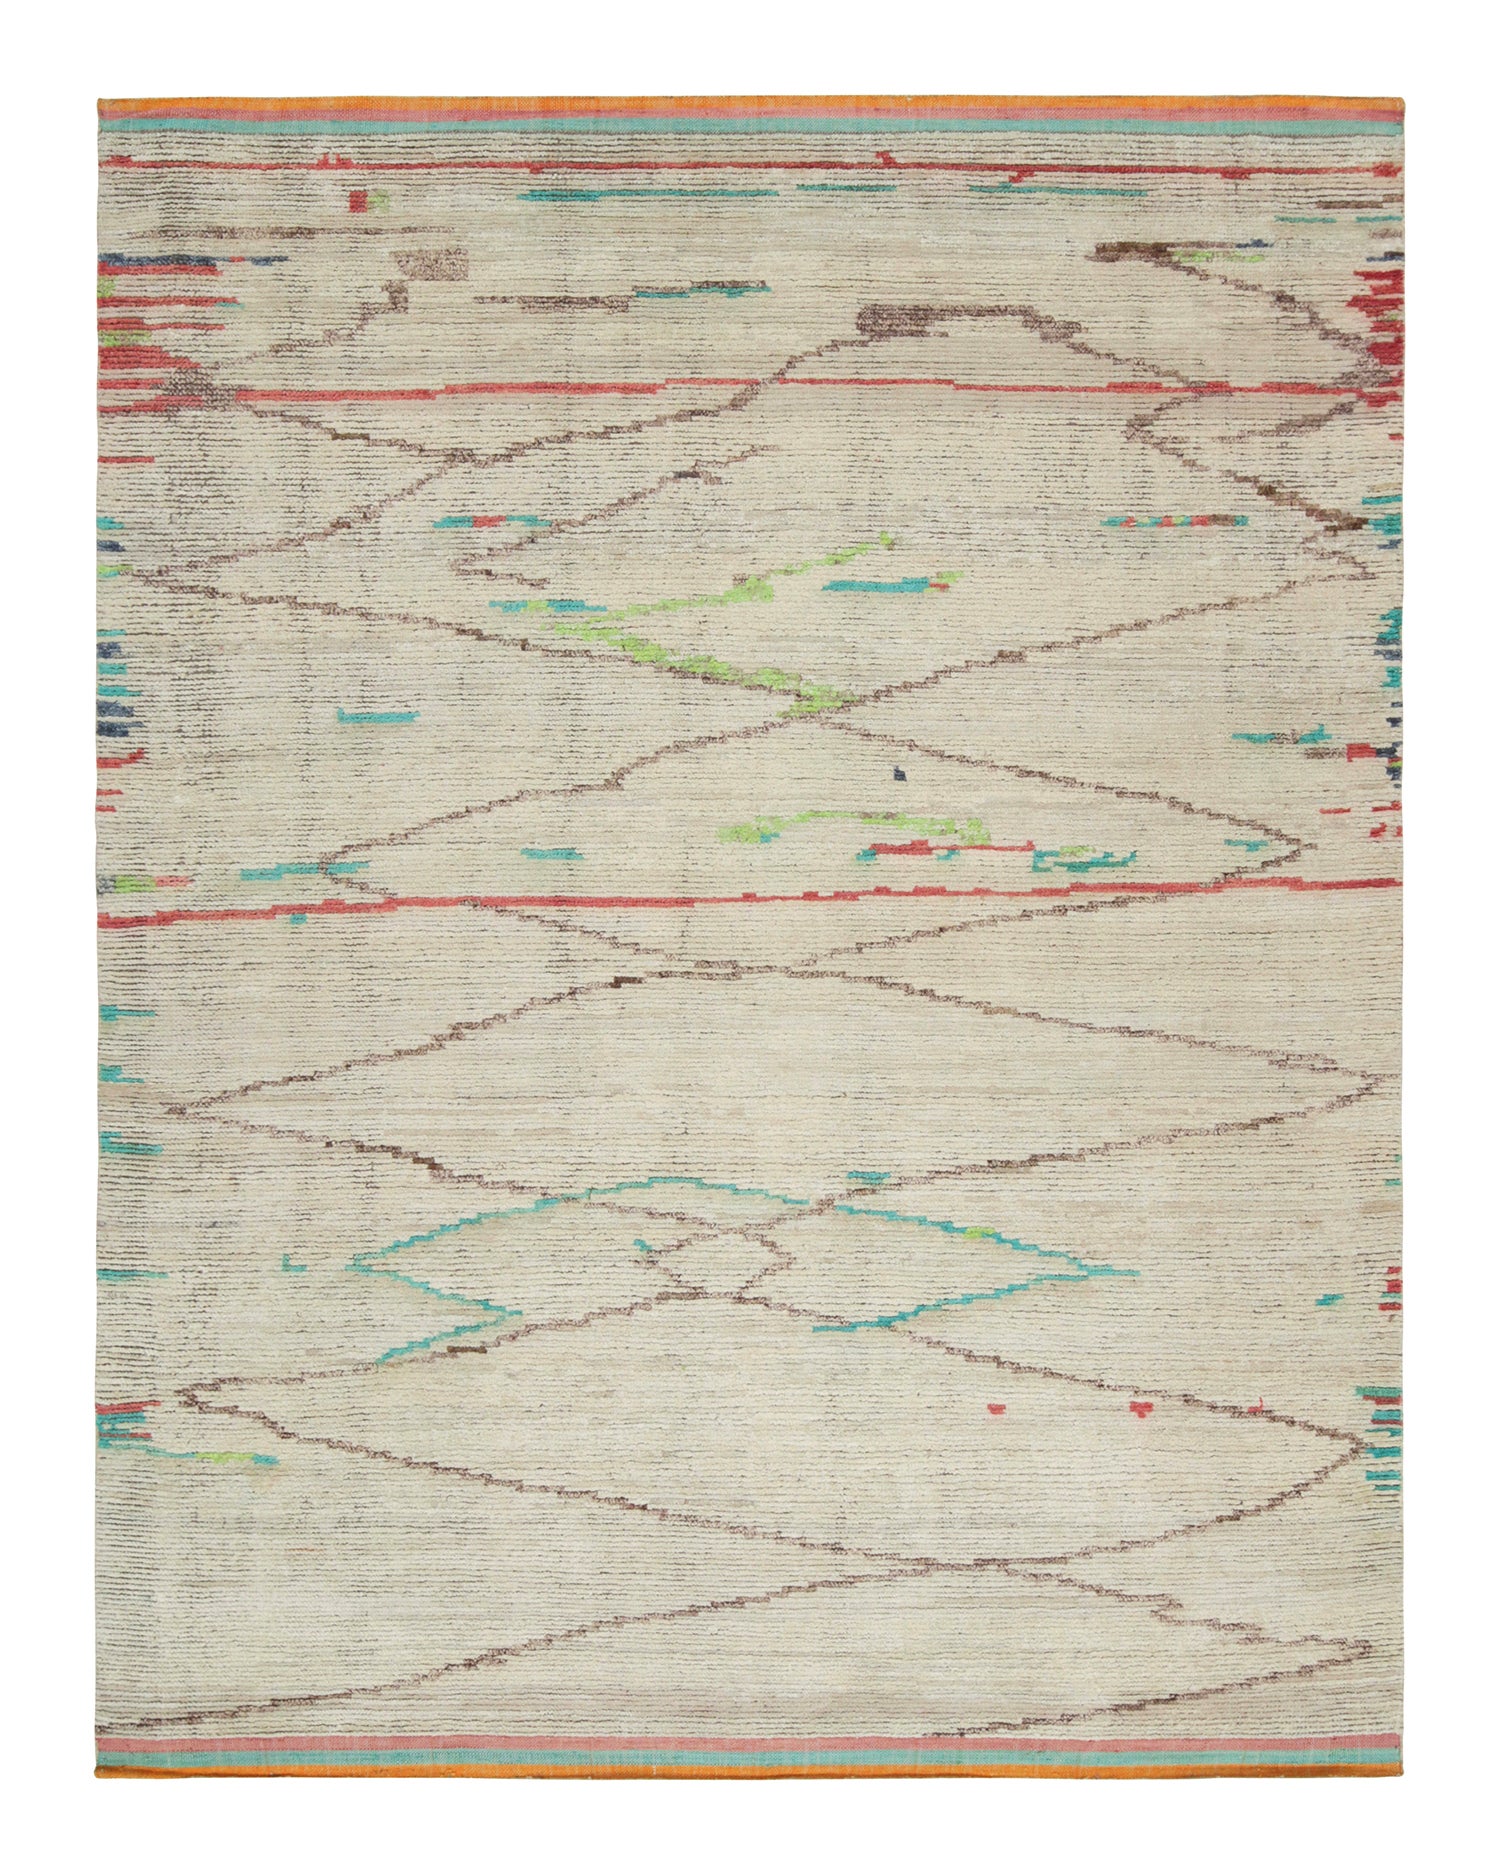 Rug & Kilim’s Moroccan style rug in Beige-Brown, Red and Green Geometric Pattern